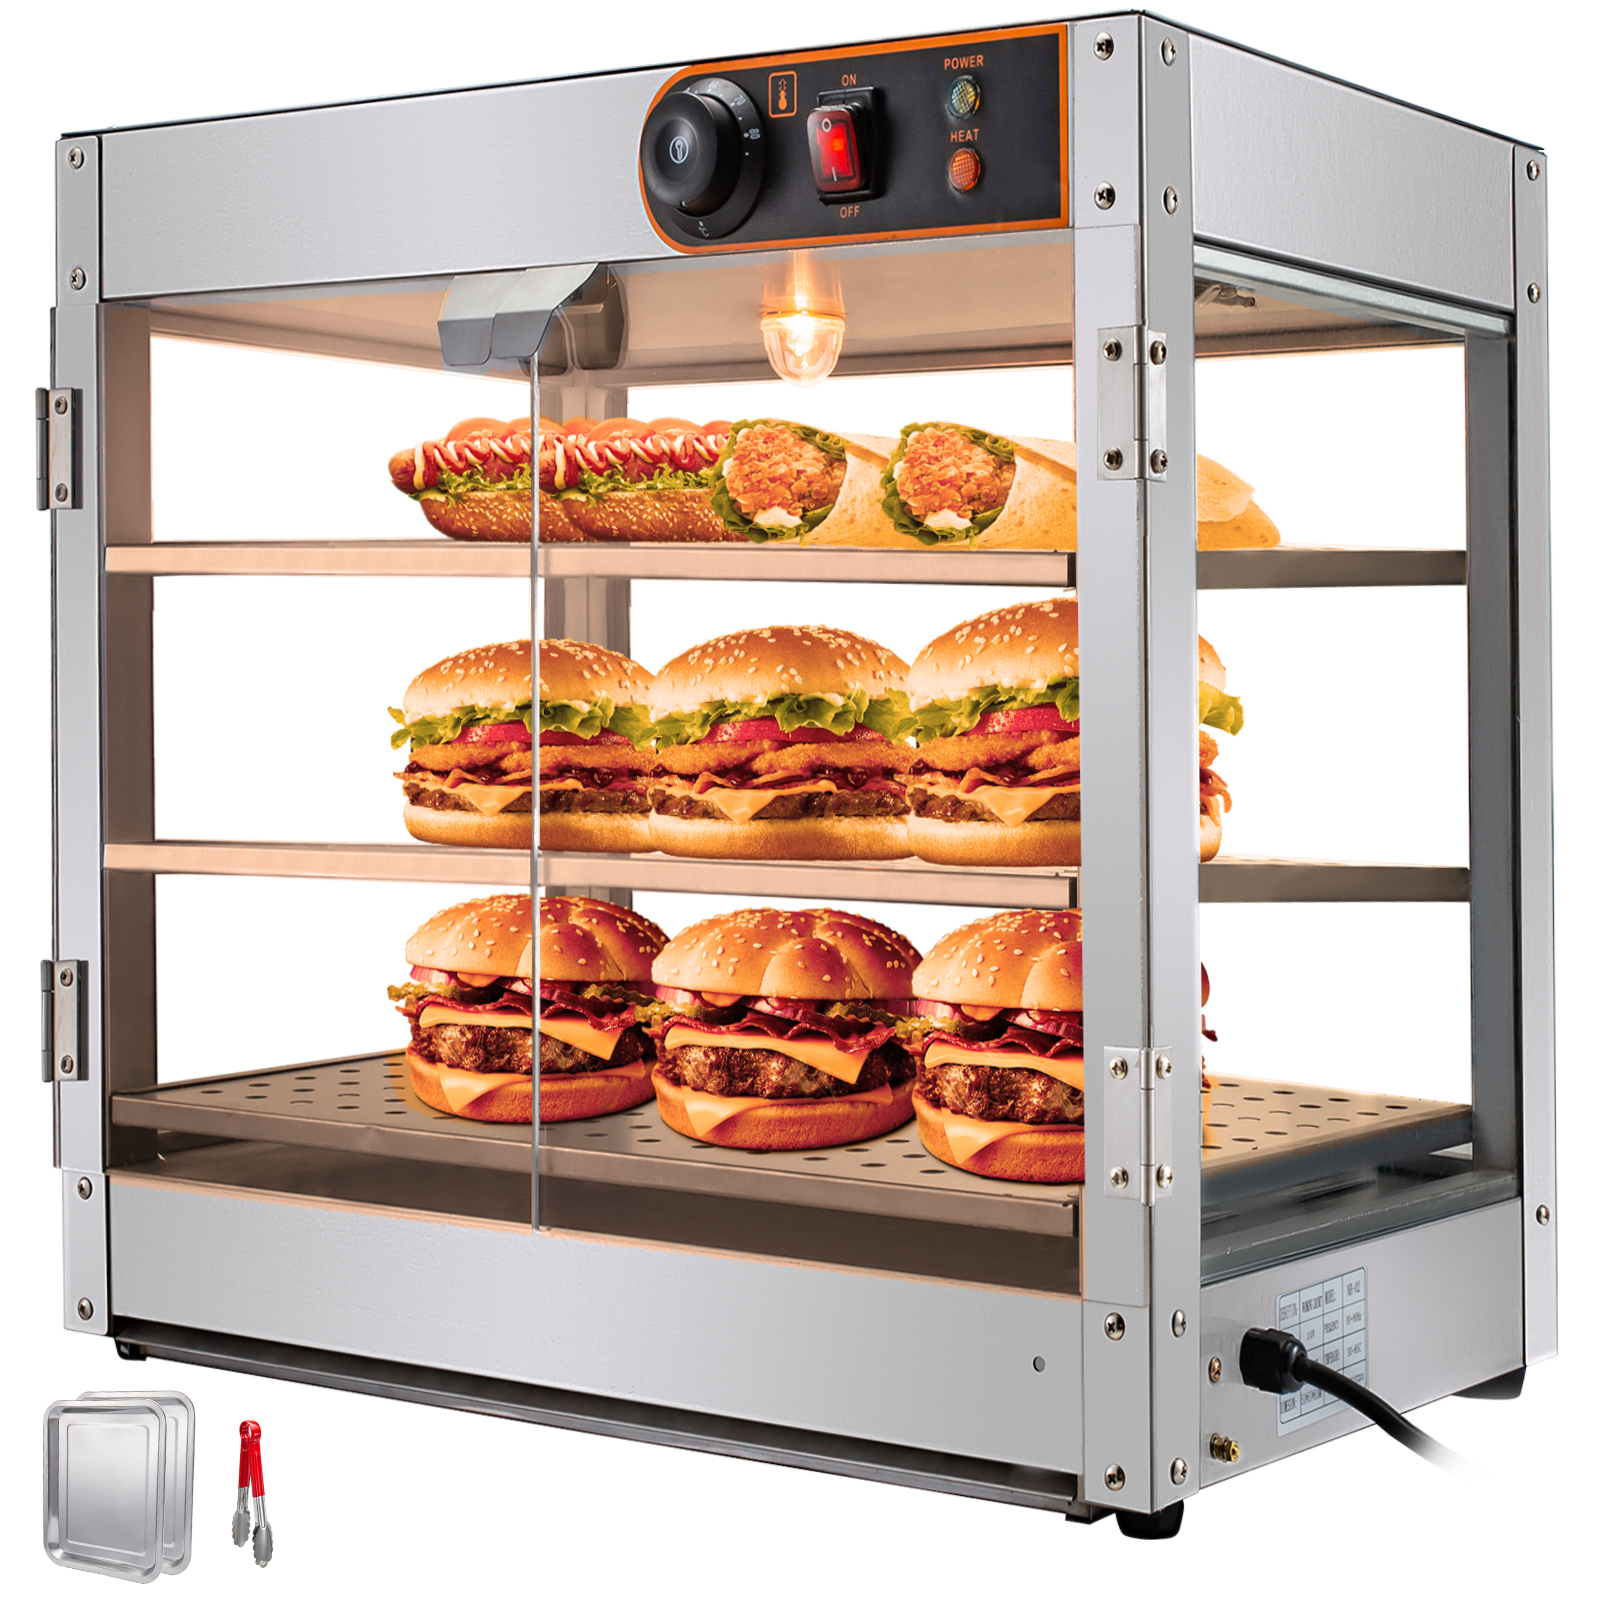 https://d2qc09rl1gfuof.cloudfront.net/product/SPBWG24YCNB-03001/commercial-food-warmer-m100-1.2.jpg